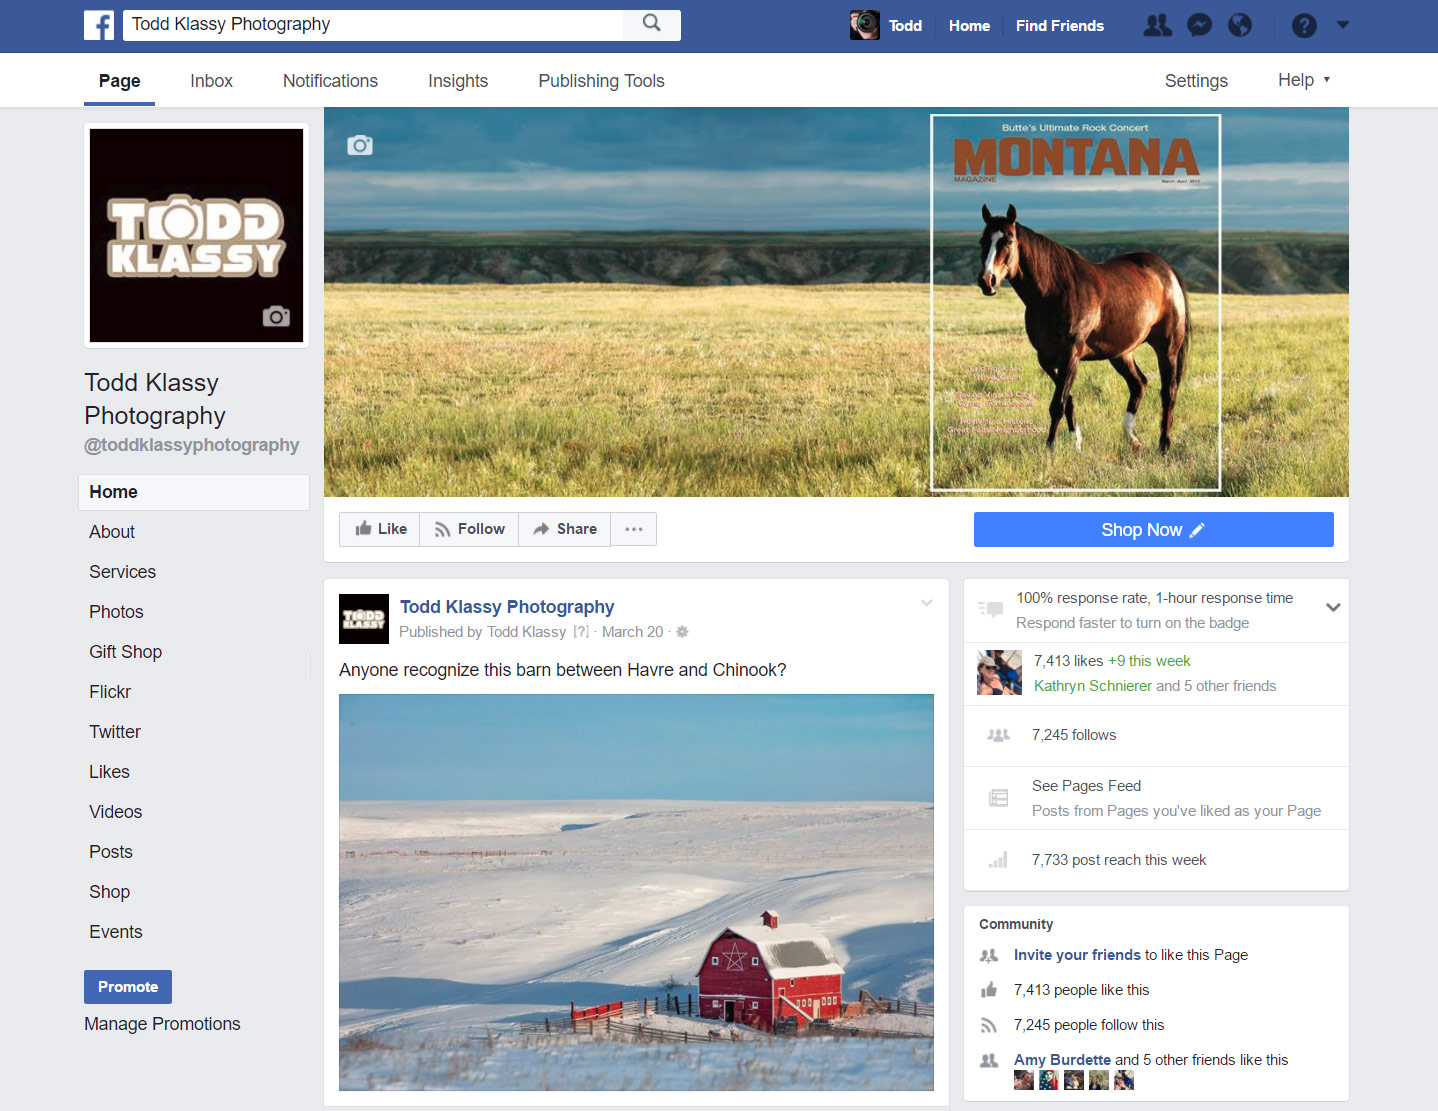 Facebook-Front-Page-for-Todd-Klassy-Agriculture-Photographer